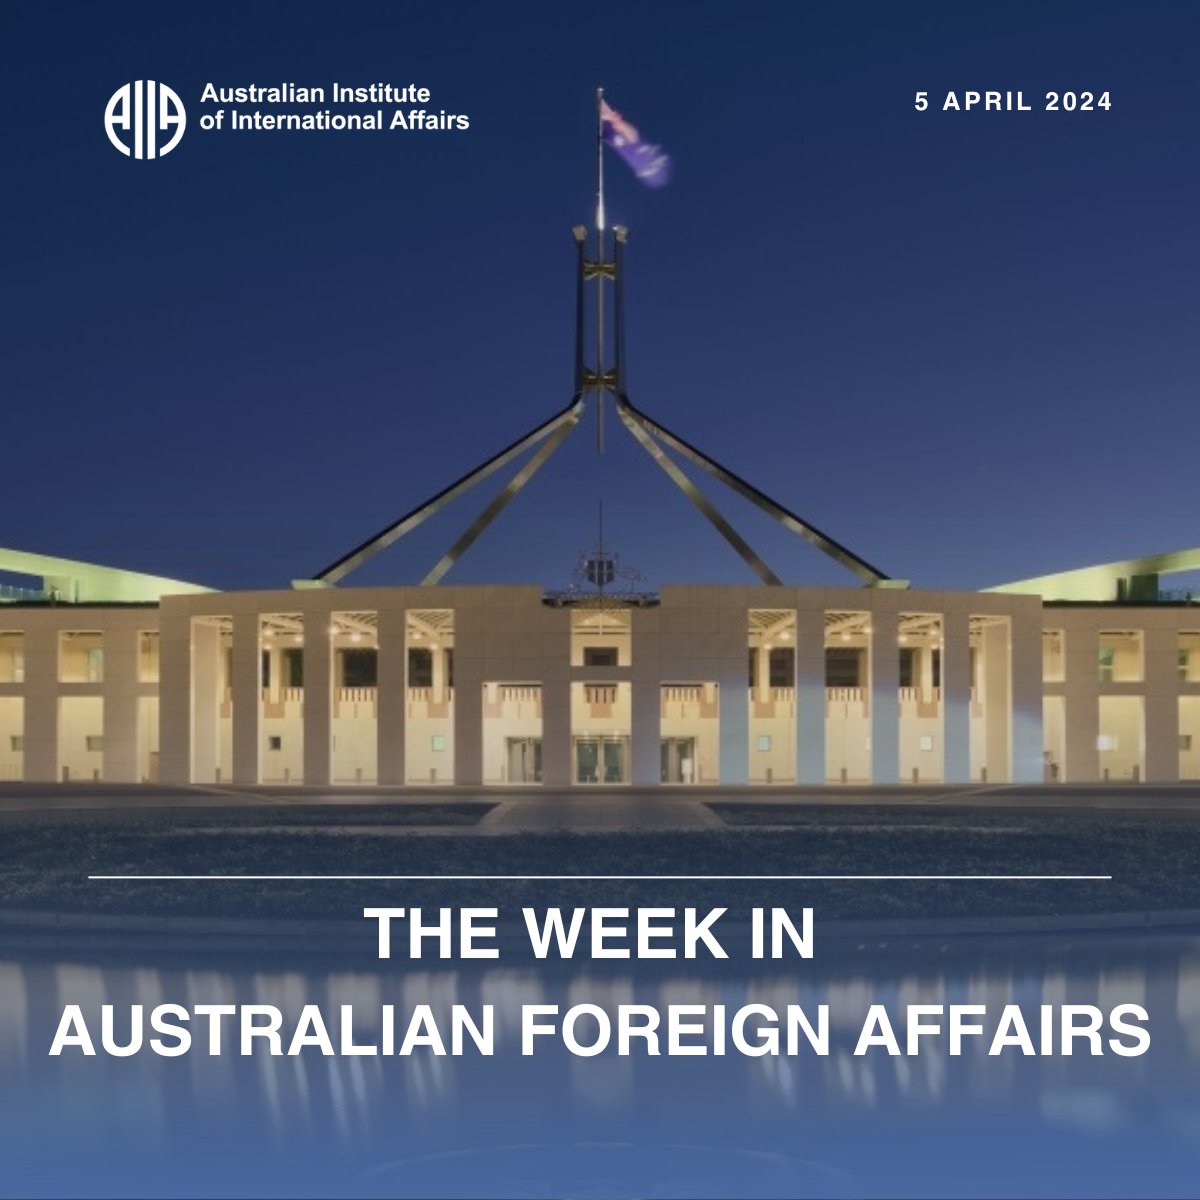 5 April 2024: “China removes sanctions on wine; Australia to produce military vehicles for Germany; statement on aid worker killed in Gaza; Watts to visit for NATO meeting,” by Adam Bartley Read more at The Week in Australian Foreign Affairs👇 ow.ly/UjWg50R8TIf